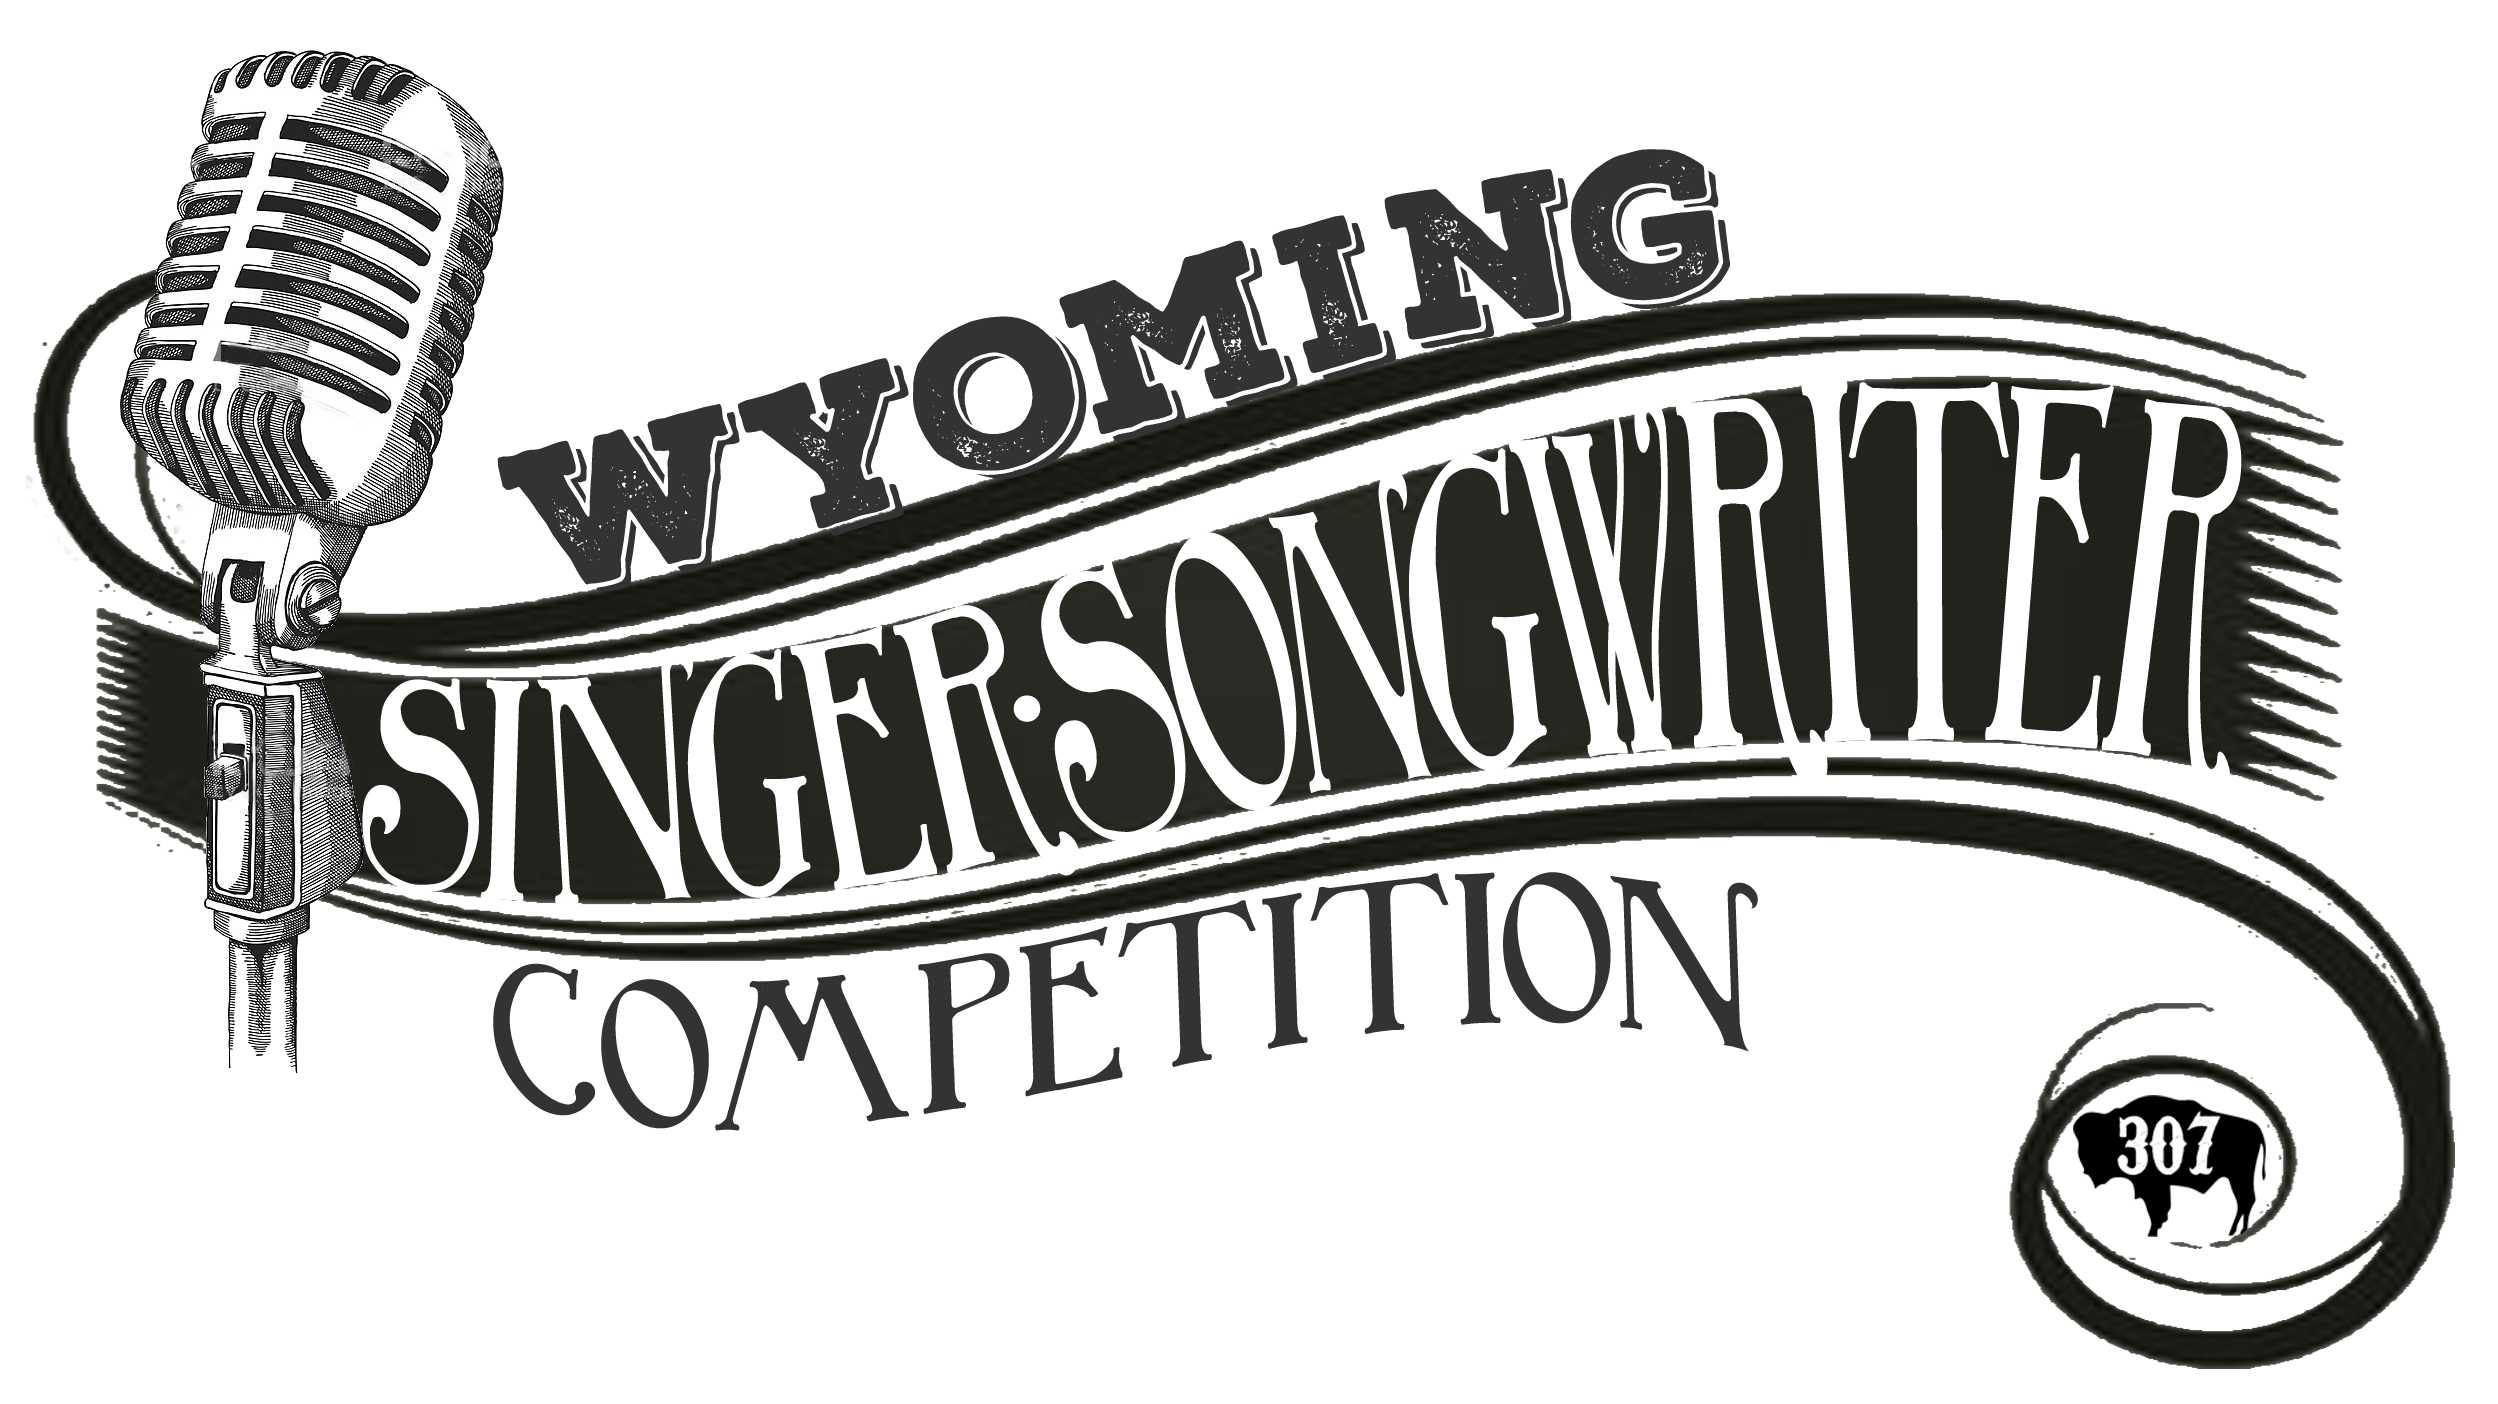 Wyoming Singer-Songwriter Competition